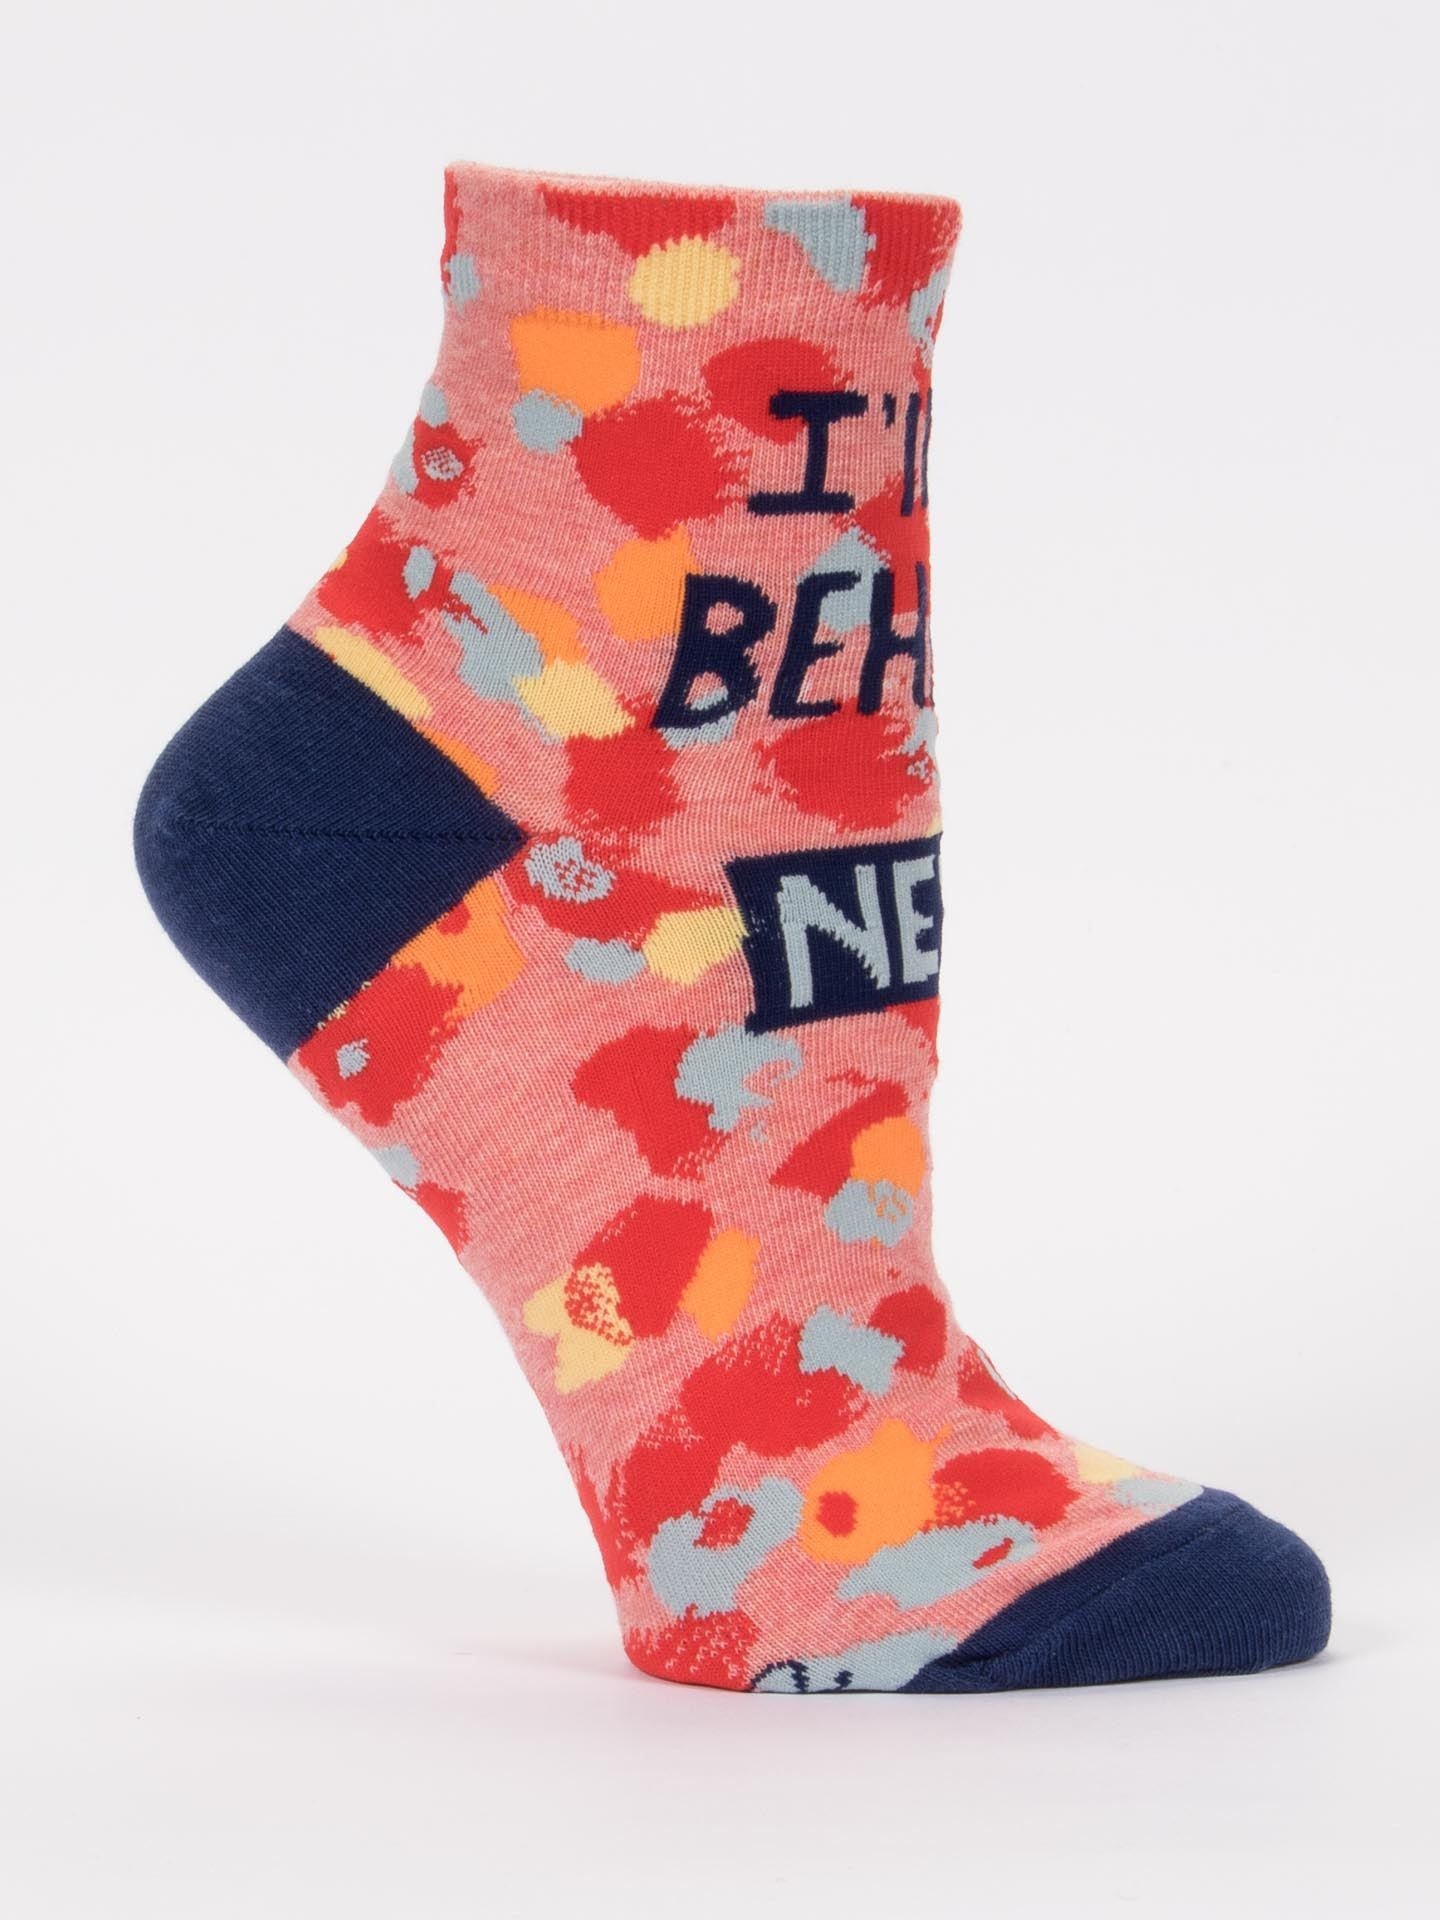 I'll Behave Never Women's Ankle Socks-Apparel > Apparel & Accessories > Clothing > Underwear & Socks-Quinn's Mercantile